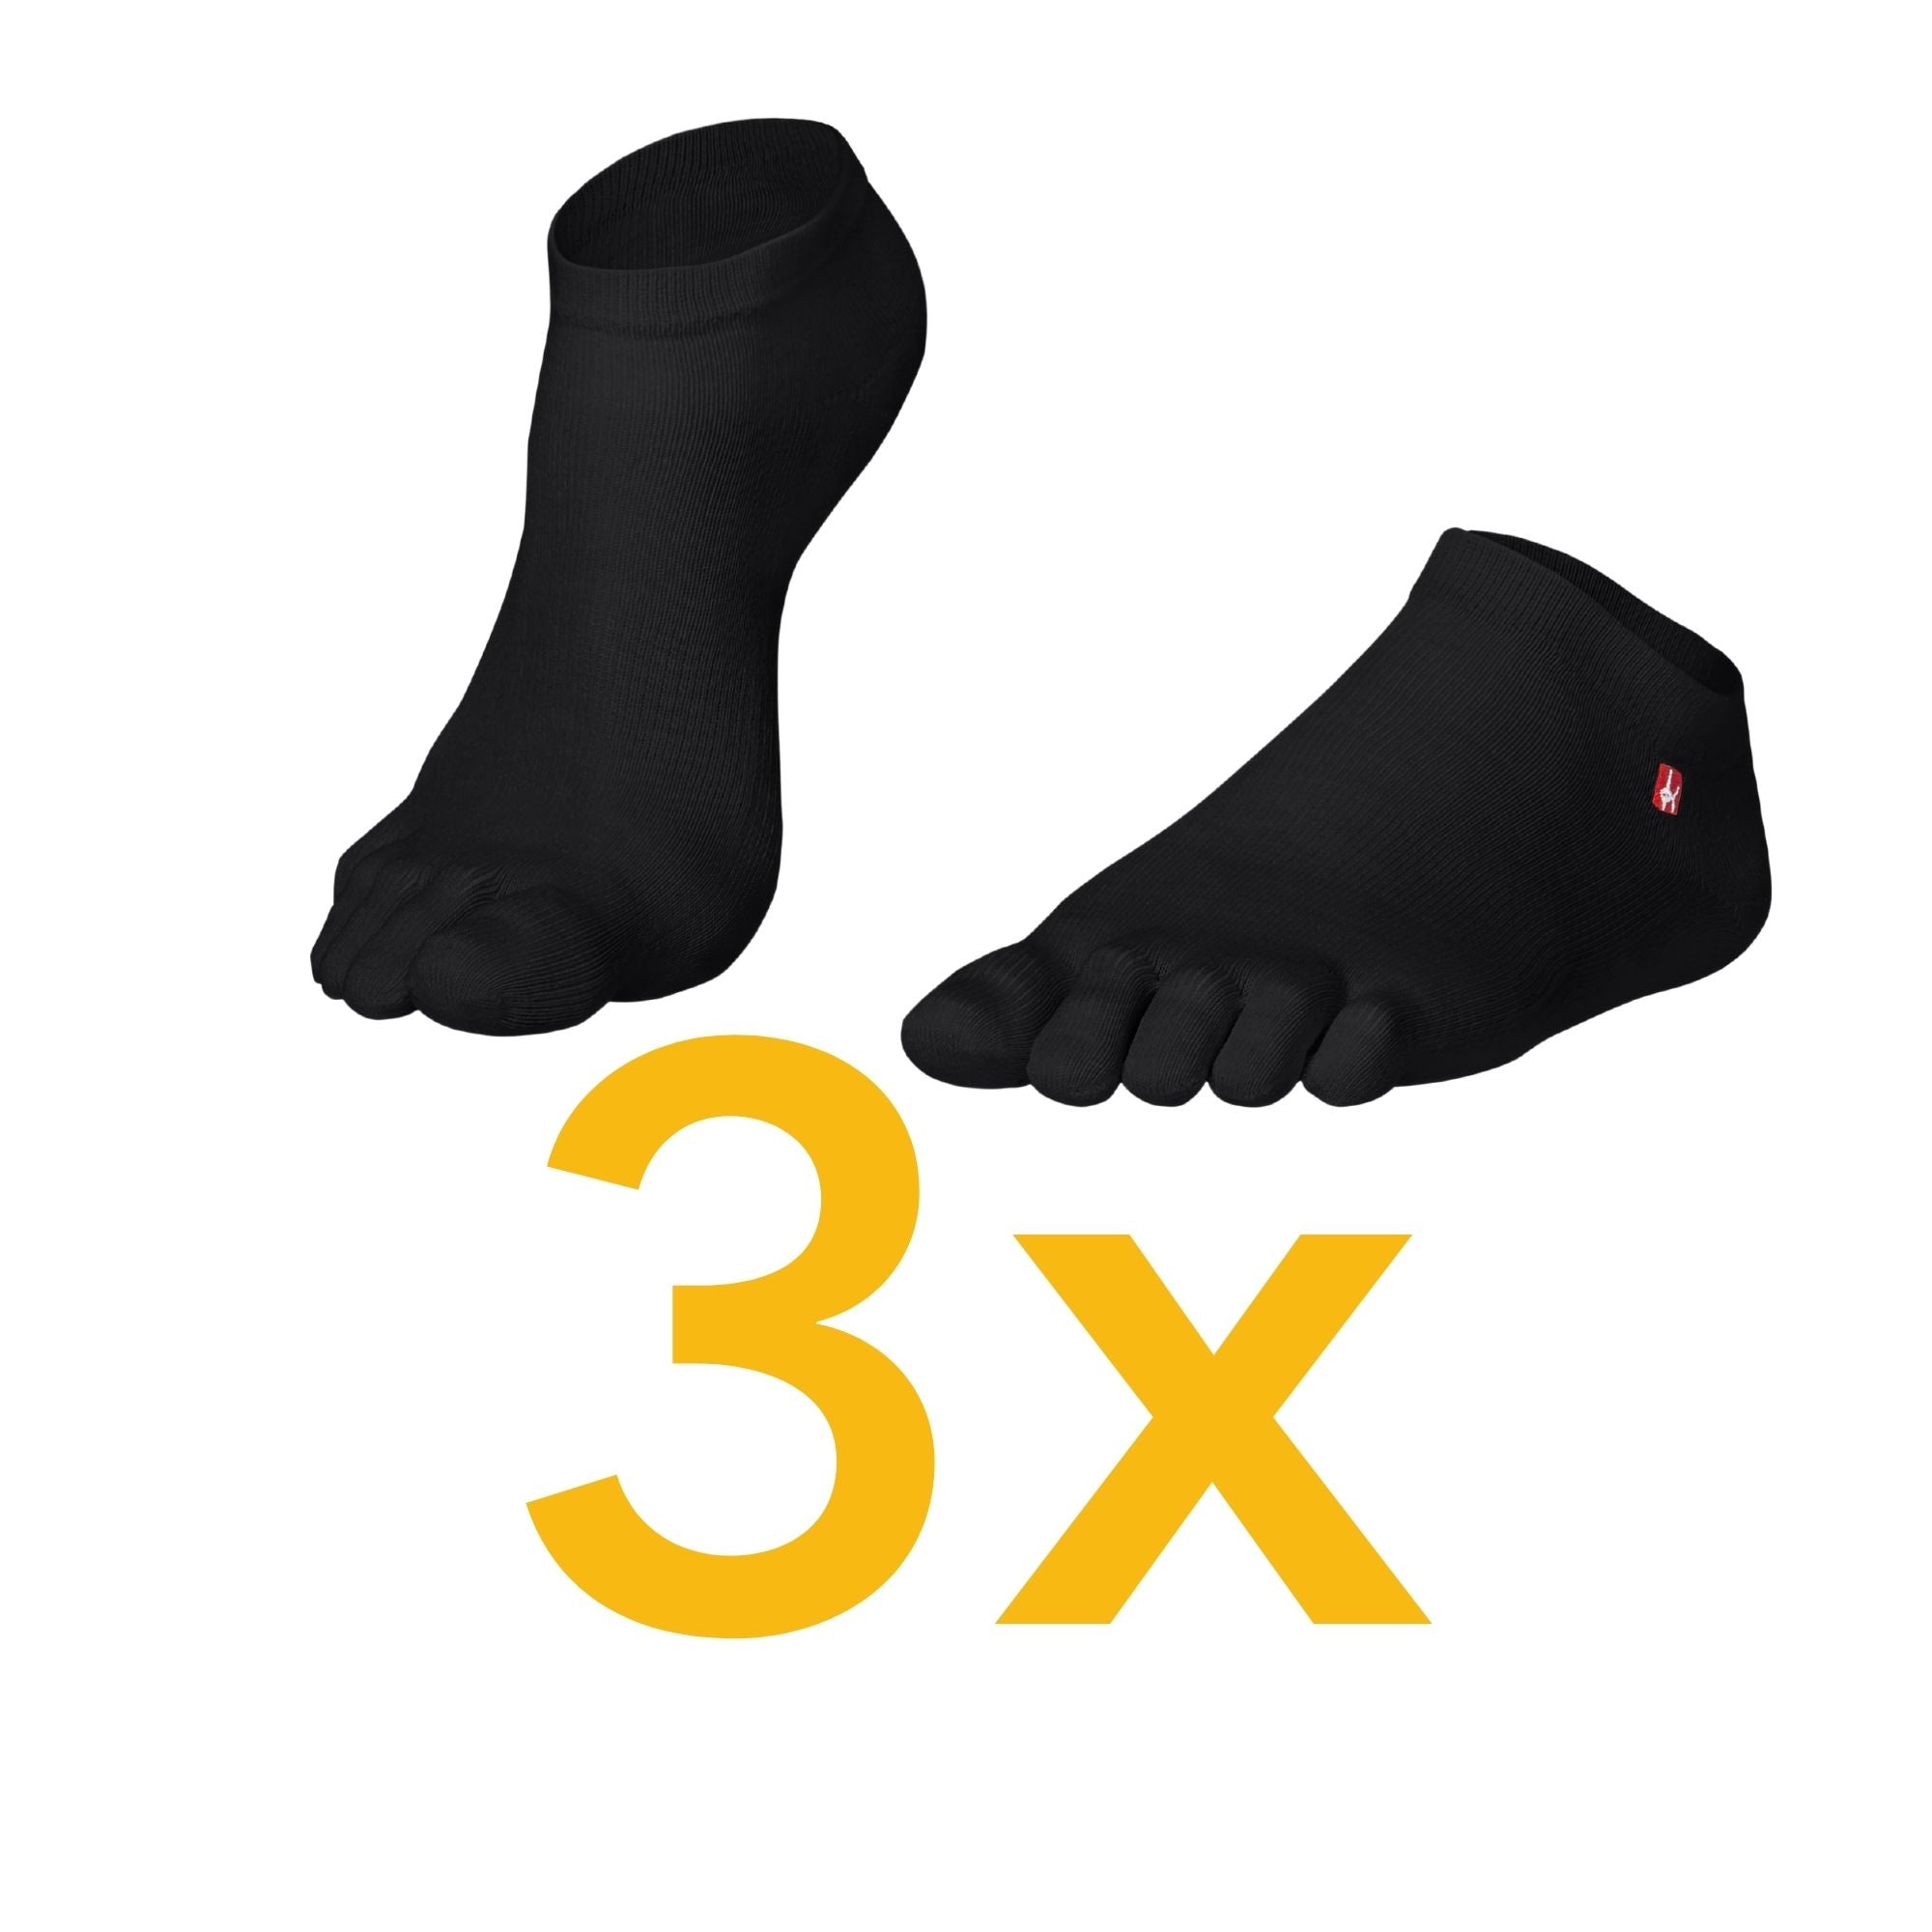 3-pack sports toe socks from Coolmax and cotton from Knitido in charcoal grey